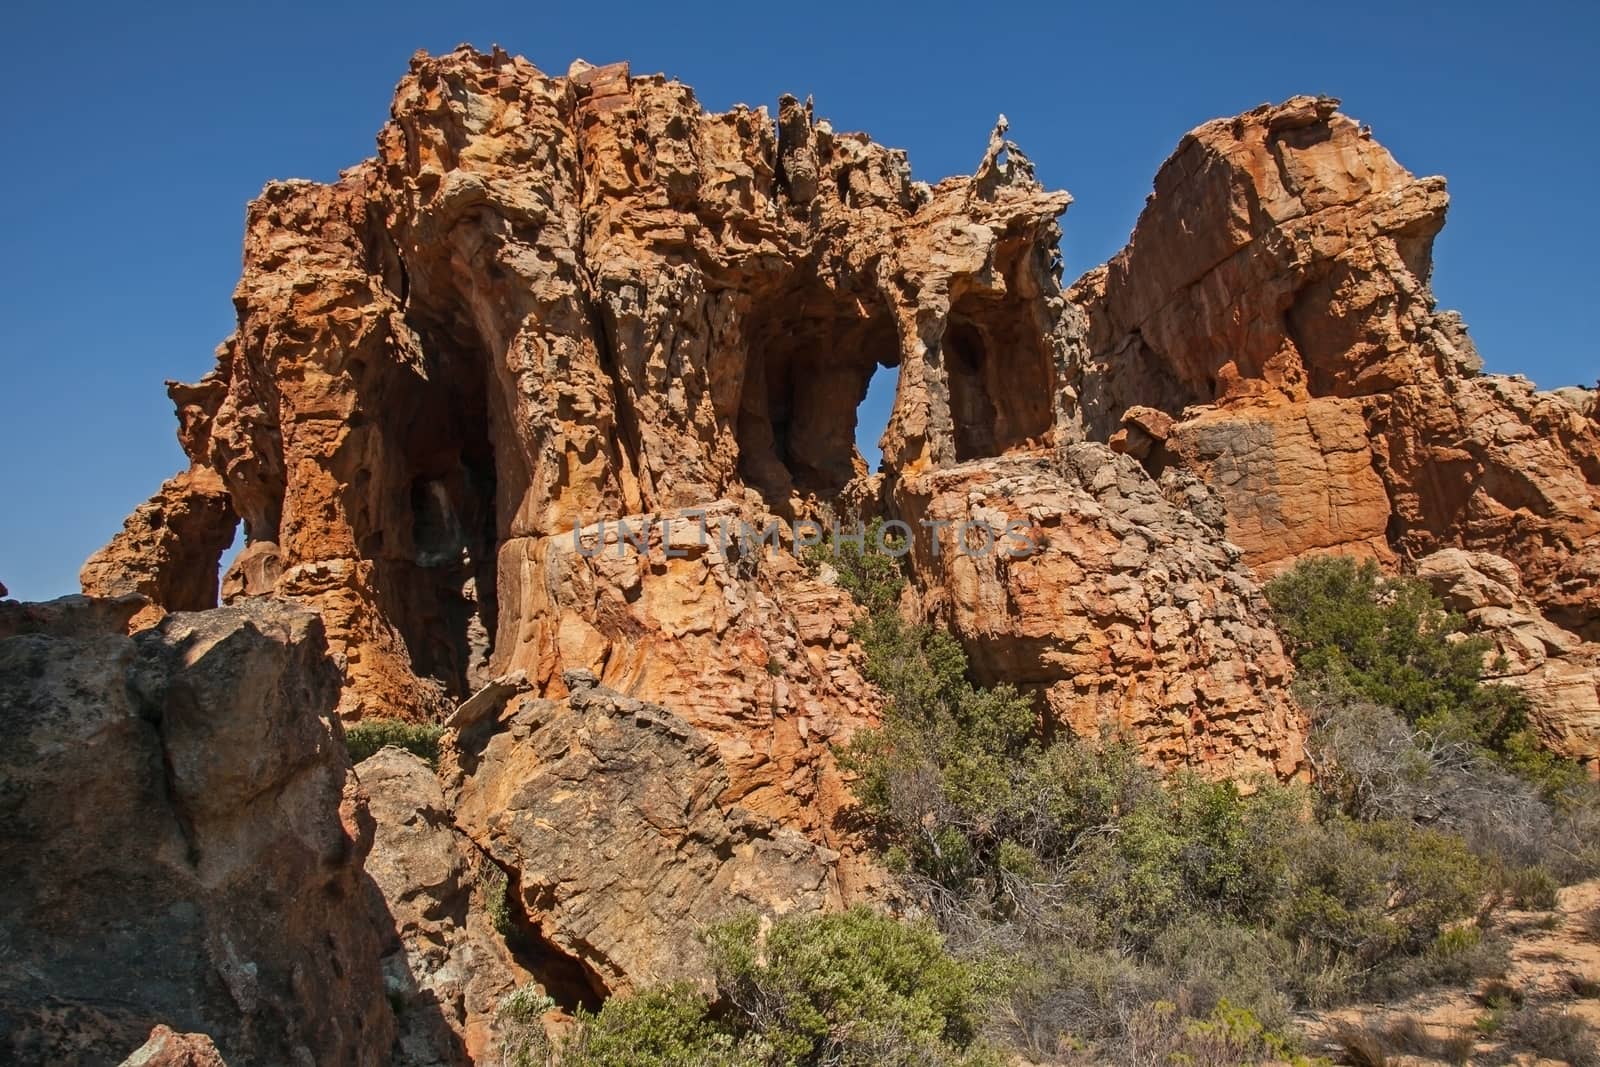 Cederberg rock formations at Stadsaal Caves 8 by kobus_peche